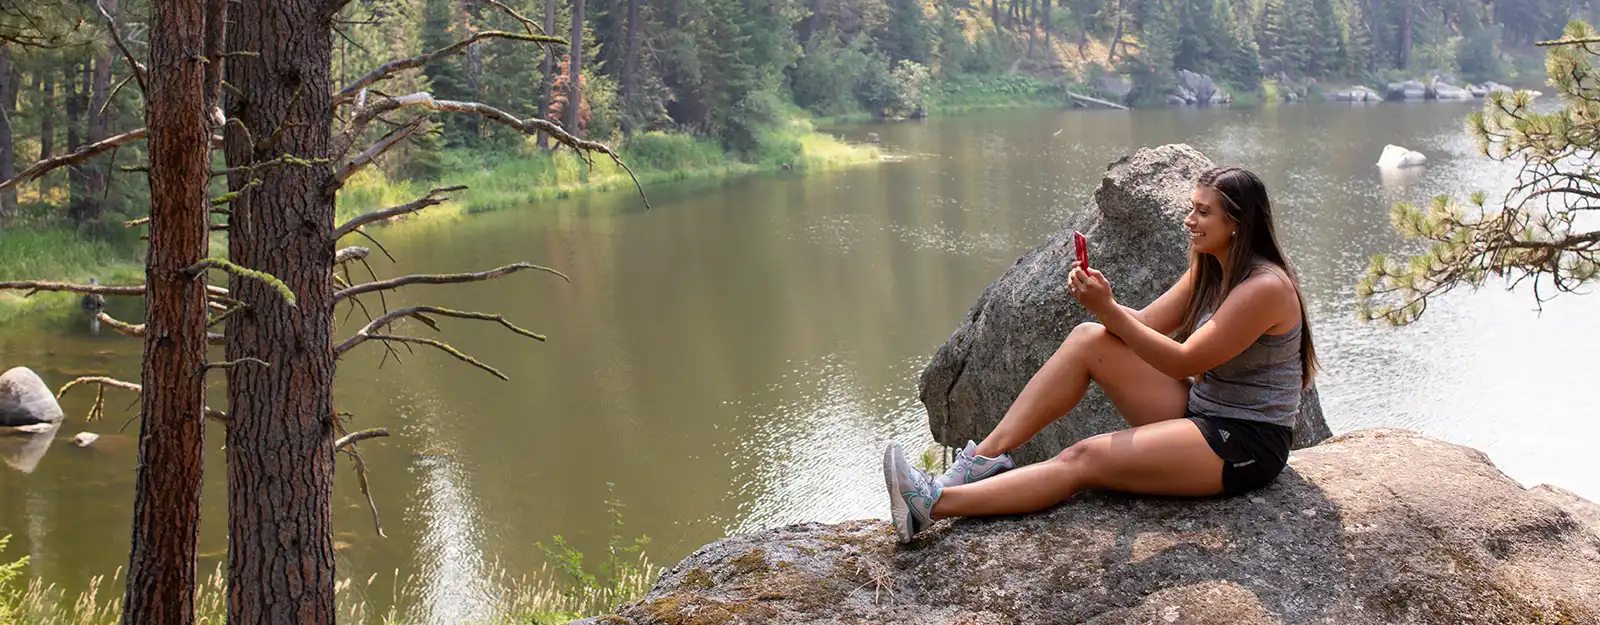 Woman in woods sitting by creek on smart phone smiling